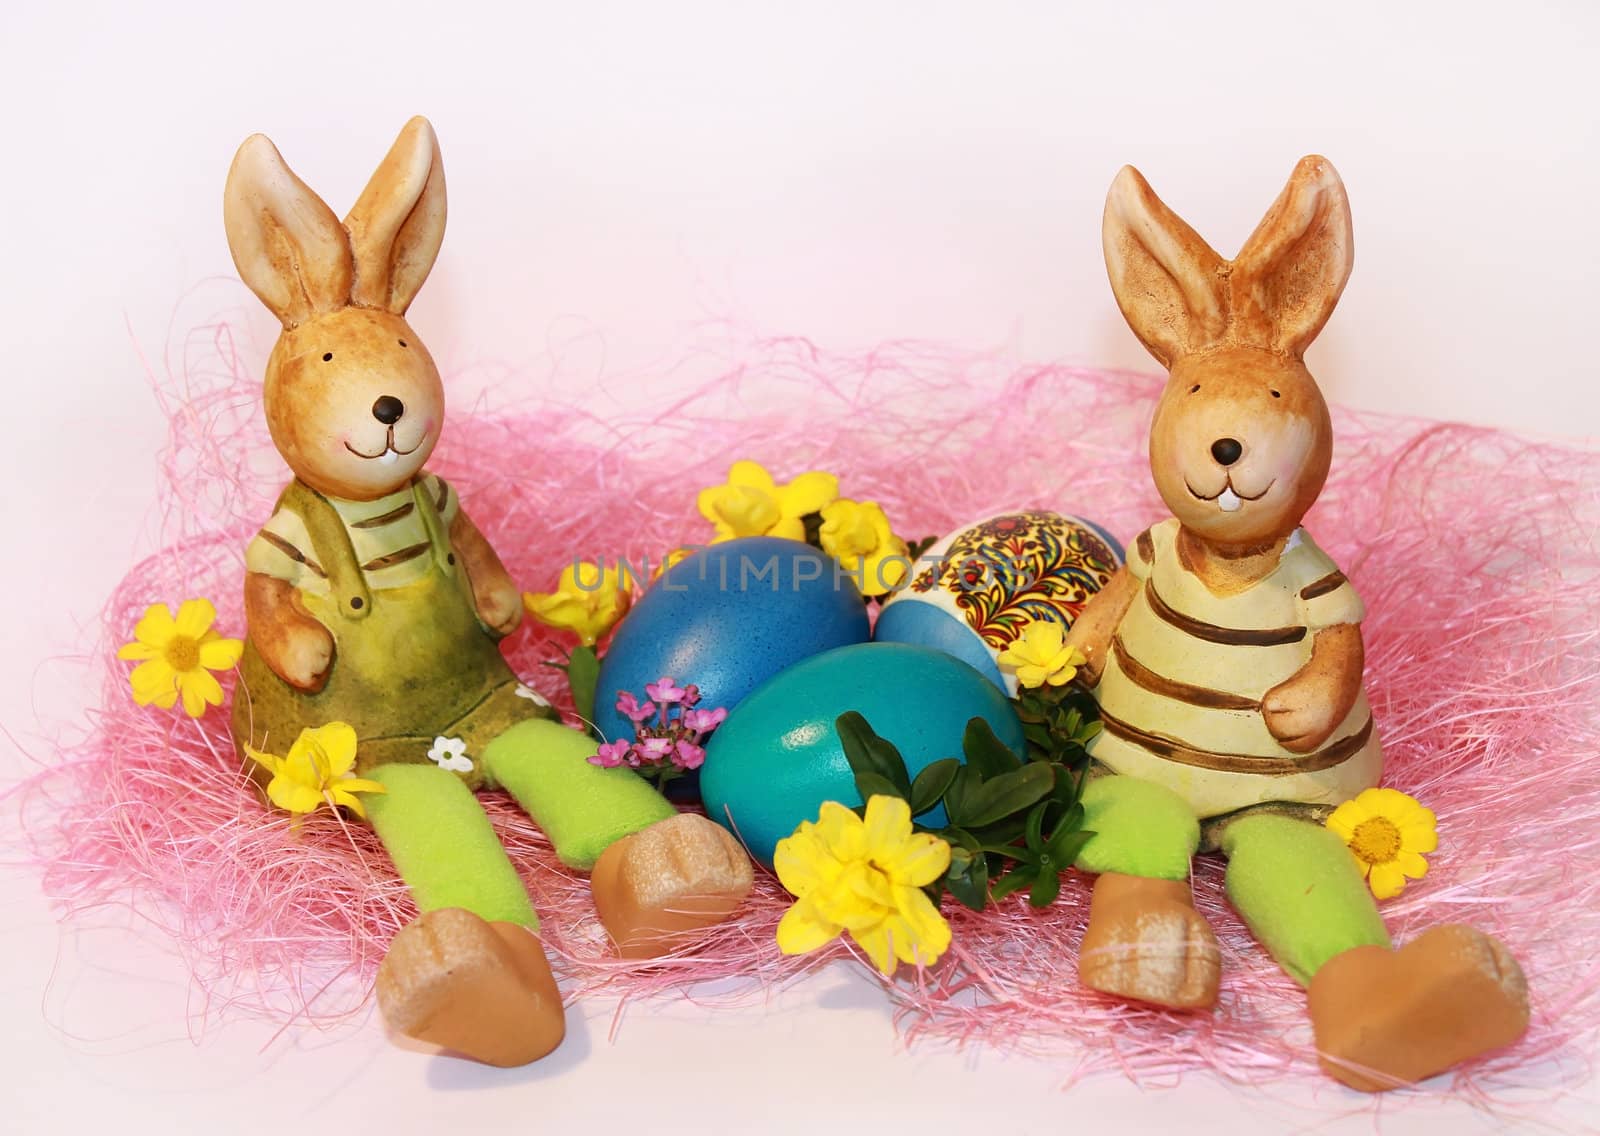 toy Easter rabbits and dyed eggs by irisphoto4